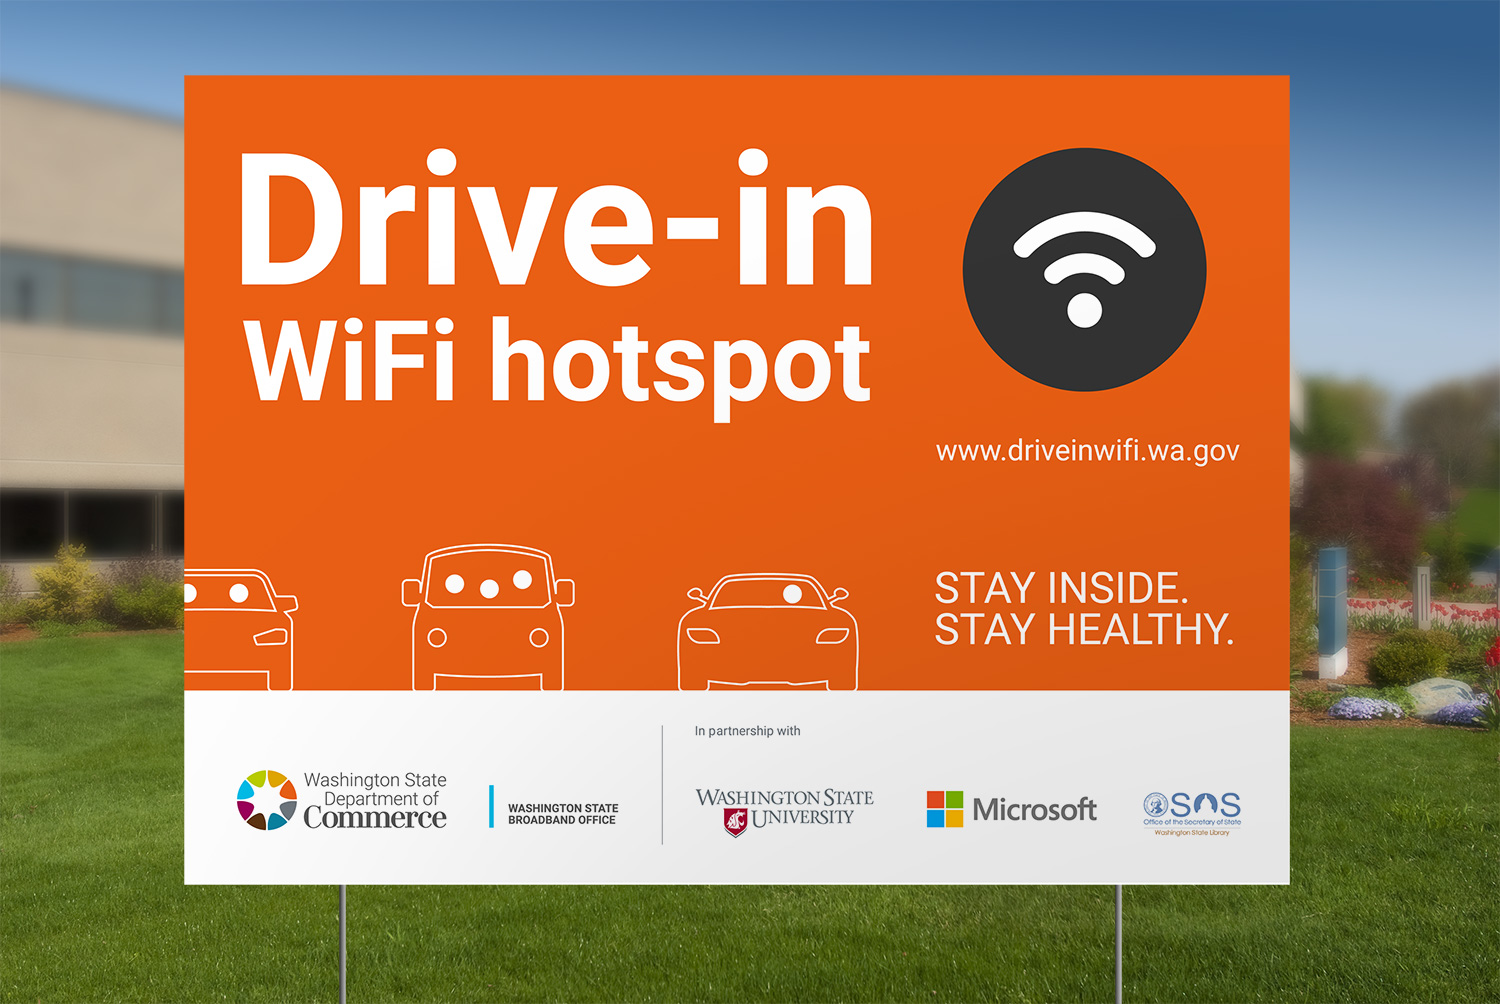 Drive-in WiFi hotspot sign